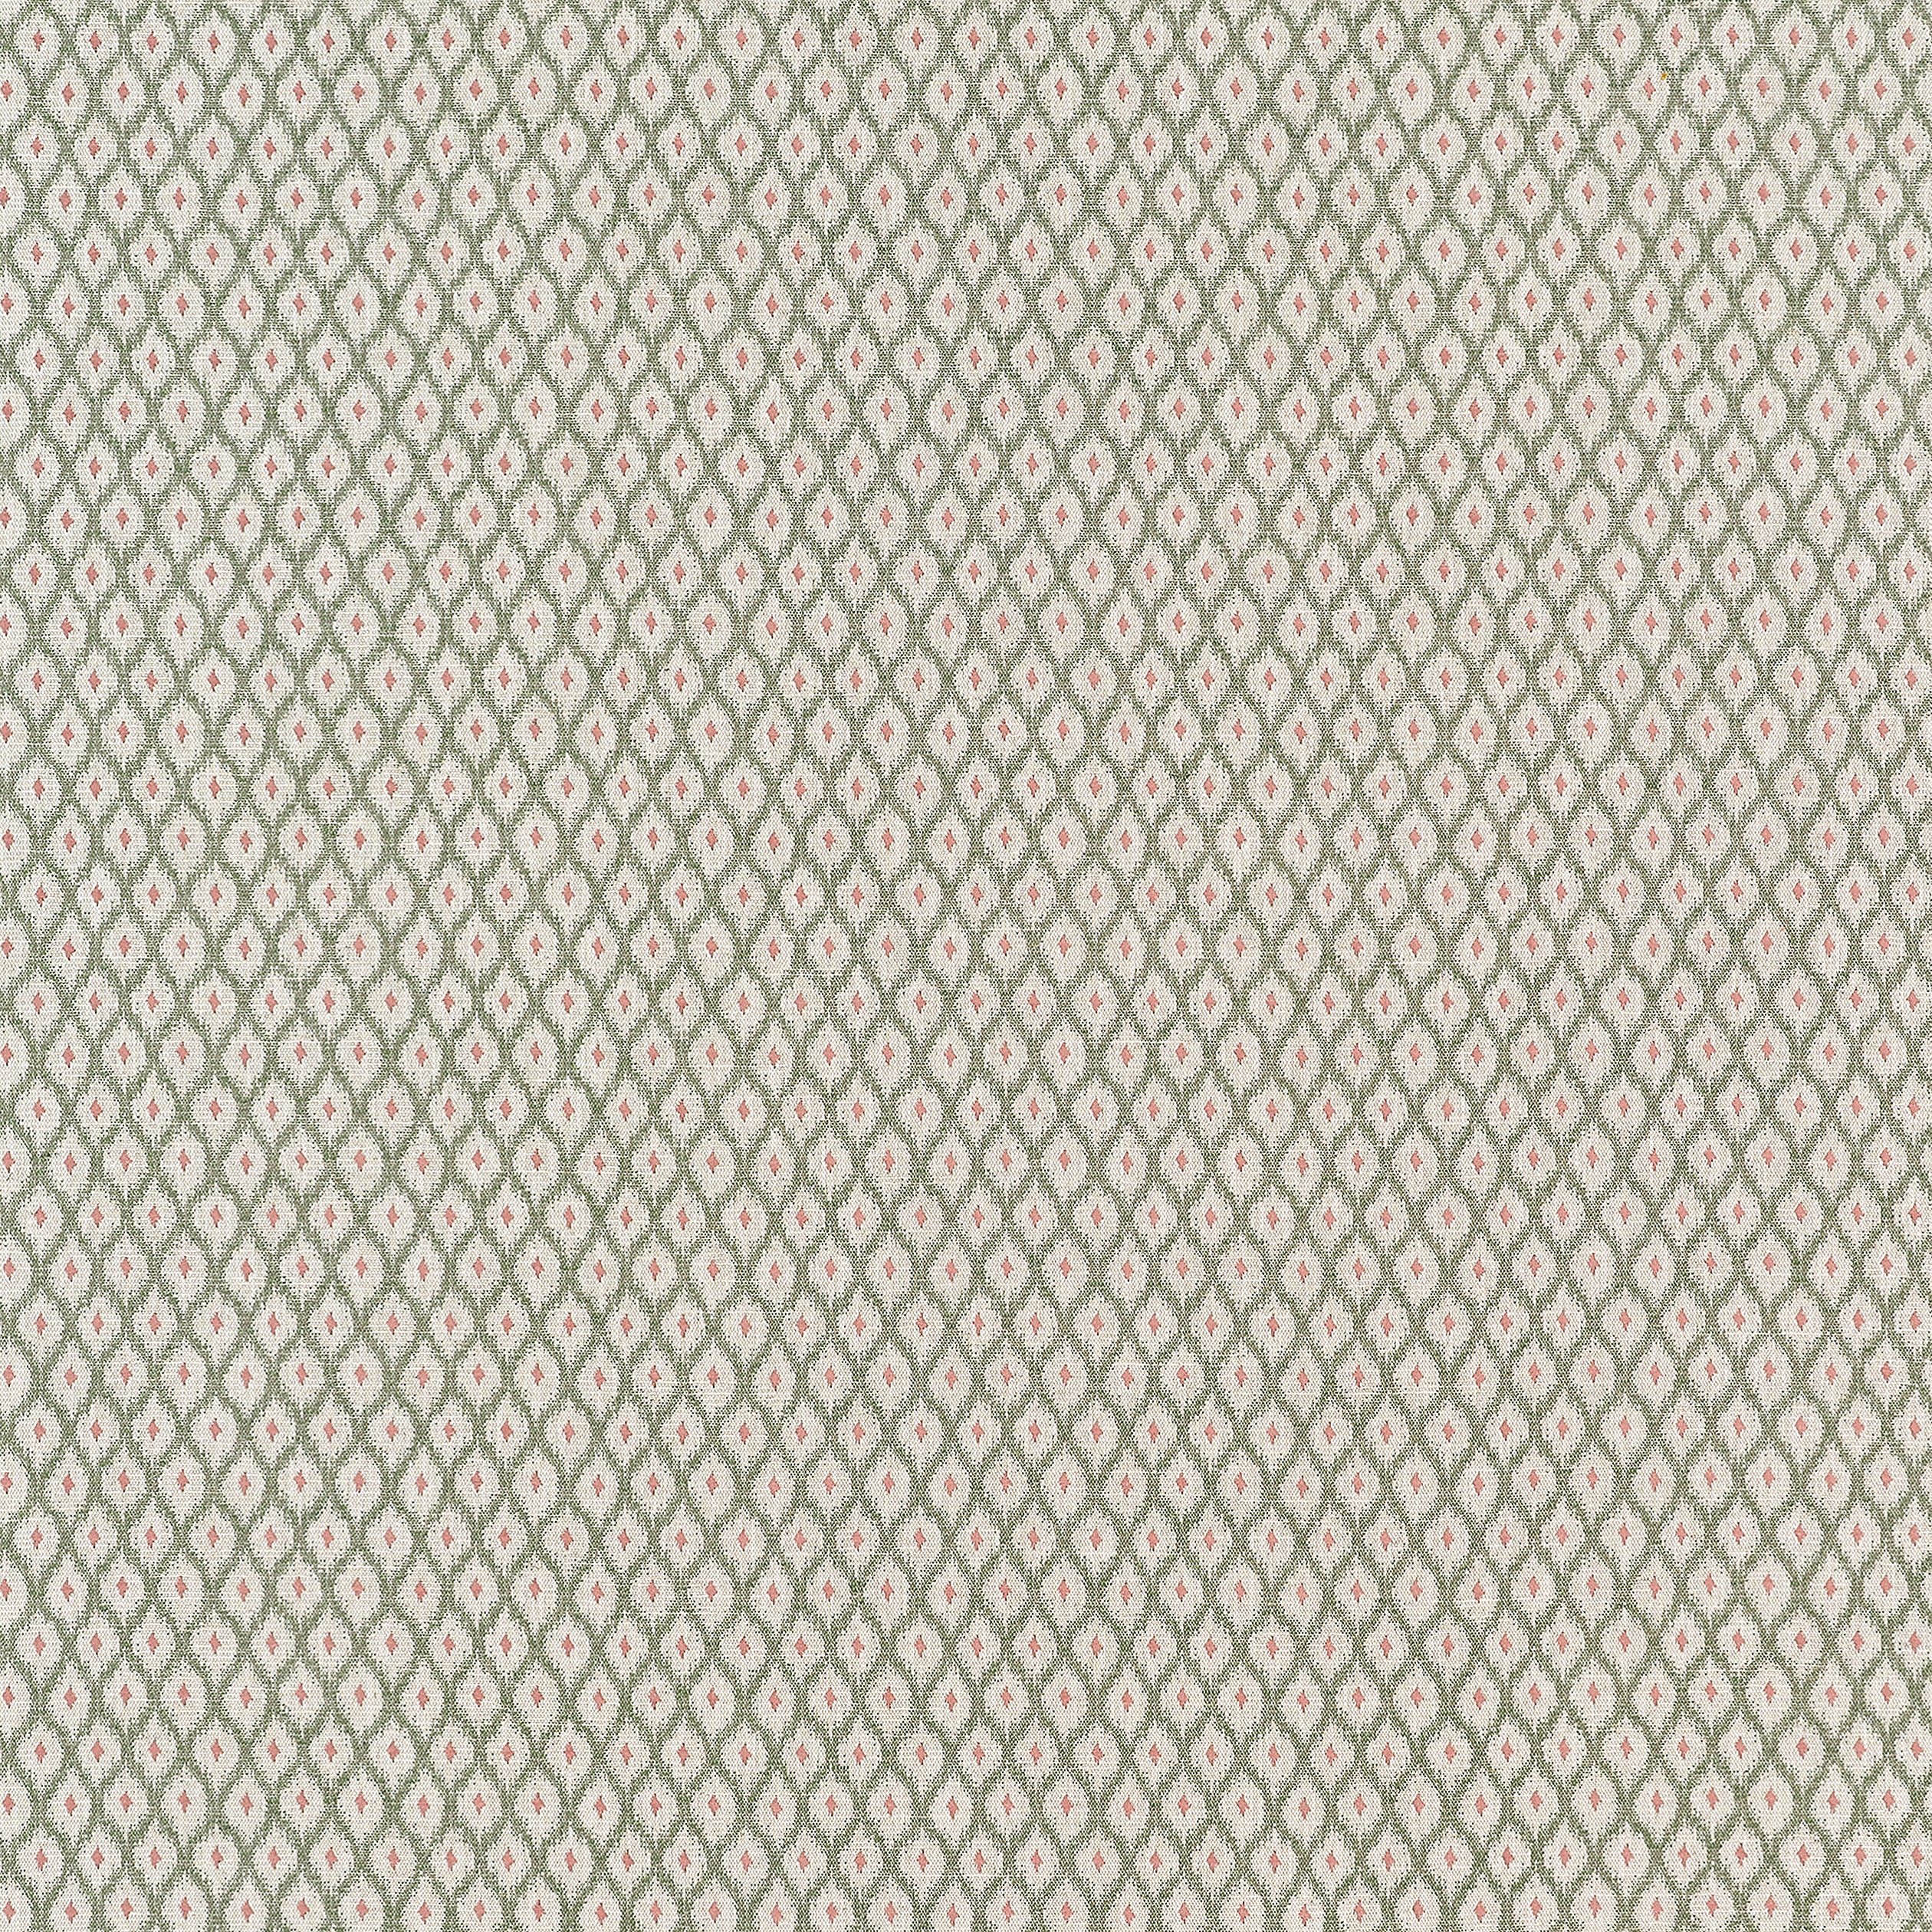 Josephine fabric in willow color - pattern number W81907 - by Thibaut in the Companions collection